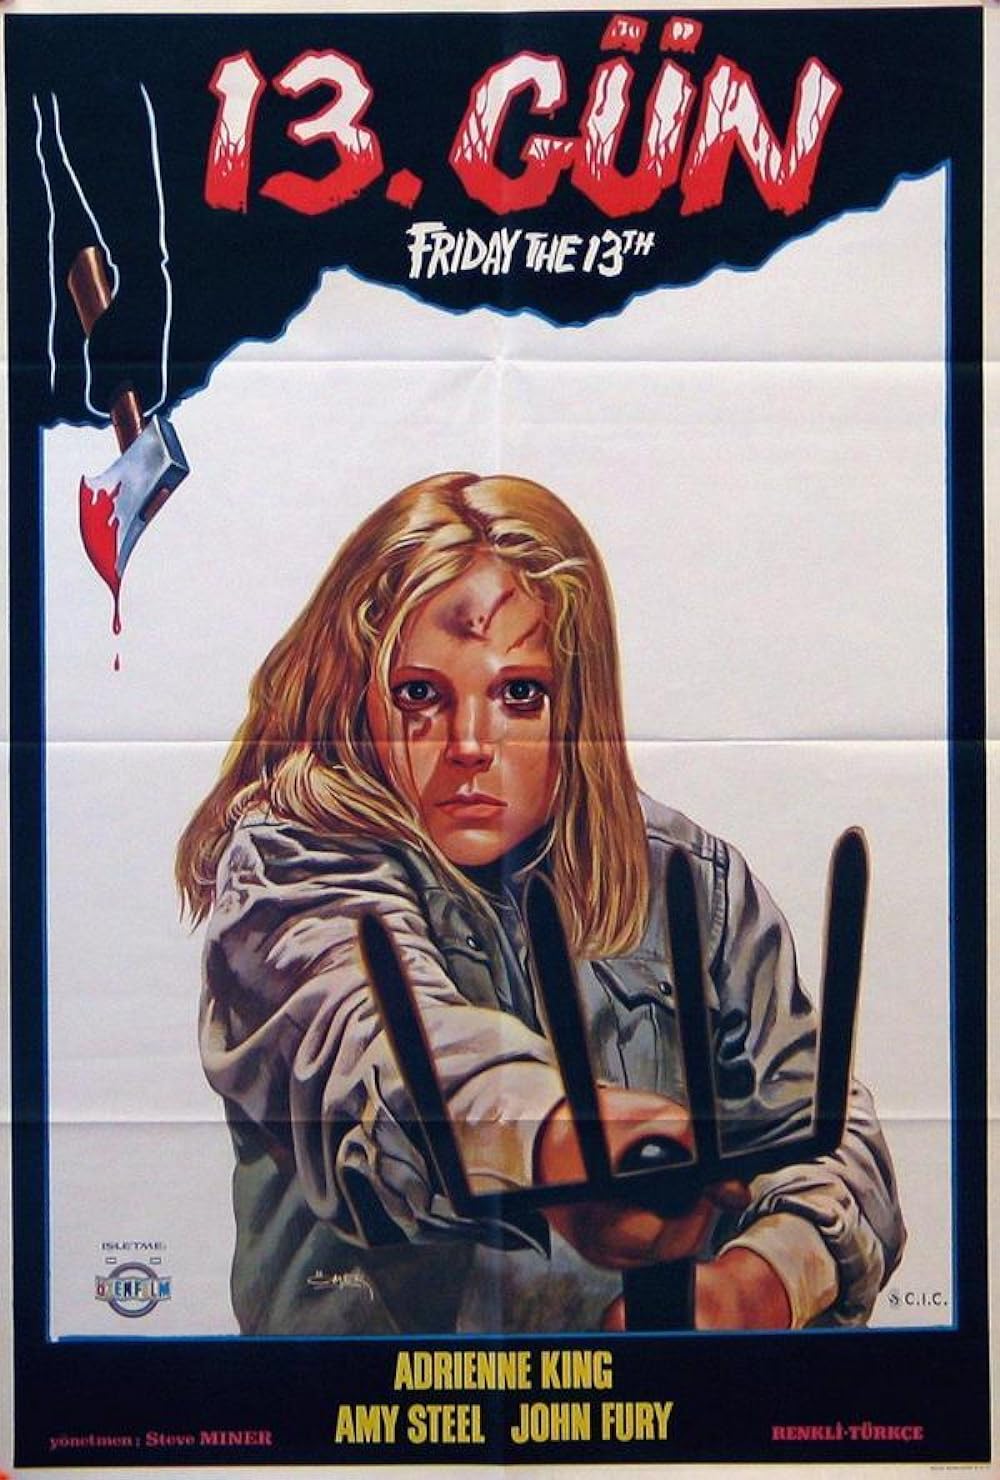 Friday the 13th (1980) Unrated Shout 640Kbps 23.976Fps 48Khz 5.1Ch BluRay Turkish Audio TAC